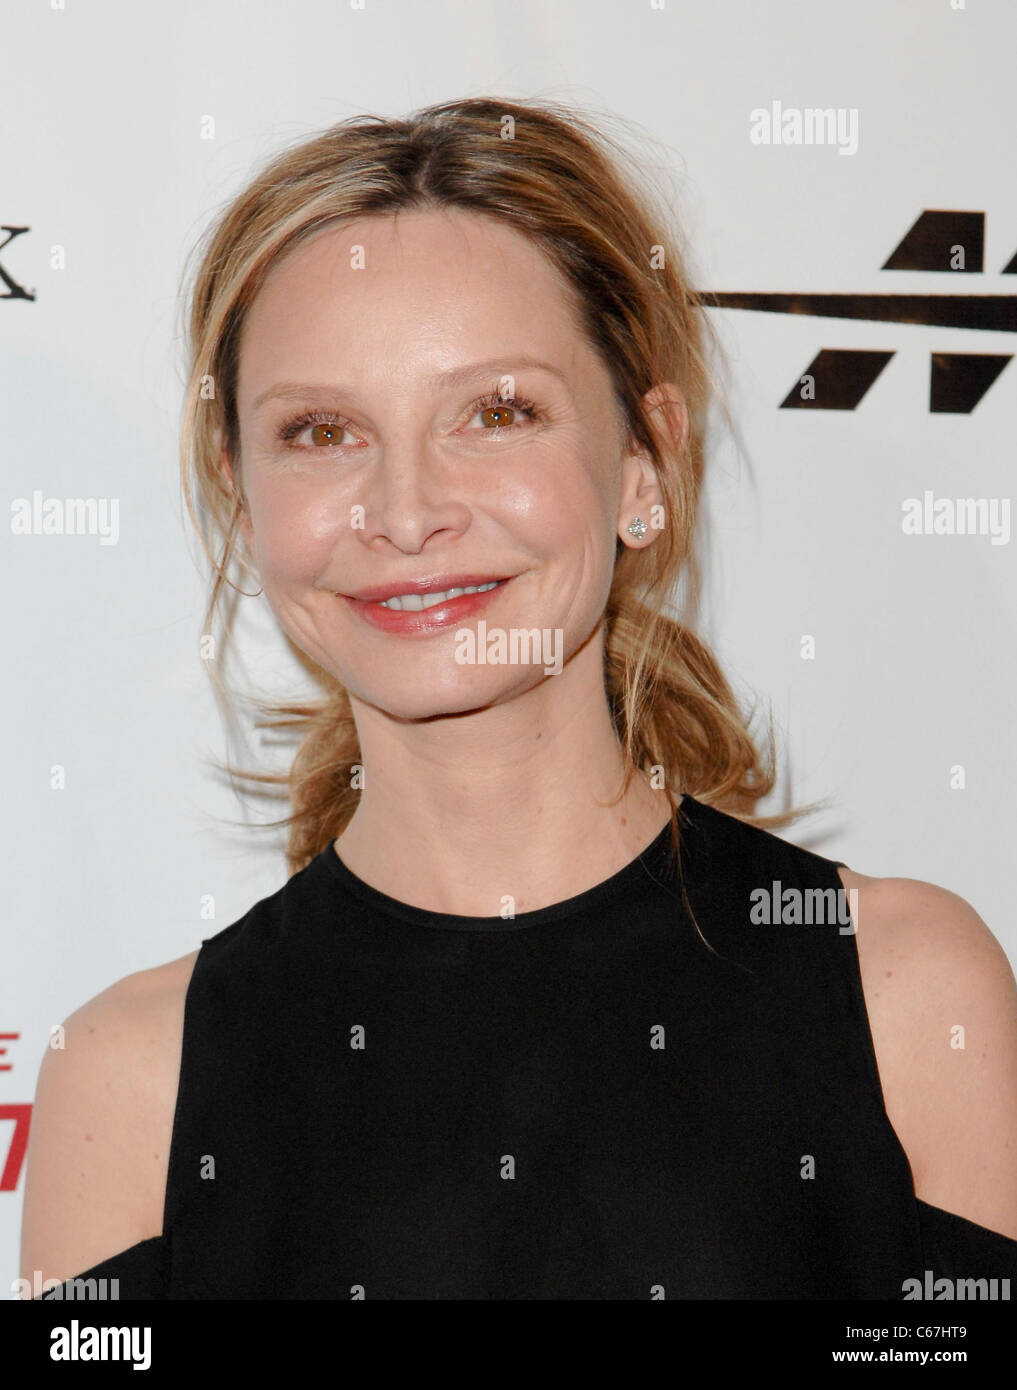 Calista Flockhart at arrivals for 8th Annual Living Legends of Aviation Awards, Beverly Hilton Hotel, Beverly Hills, CA January Stock Photo